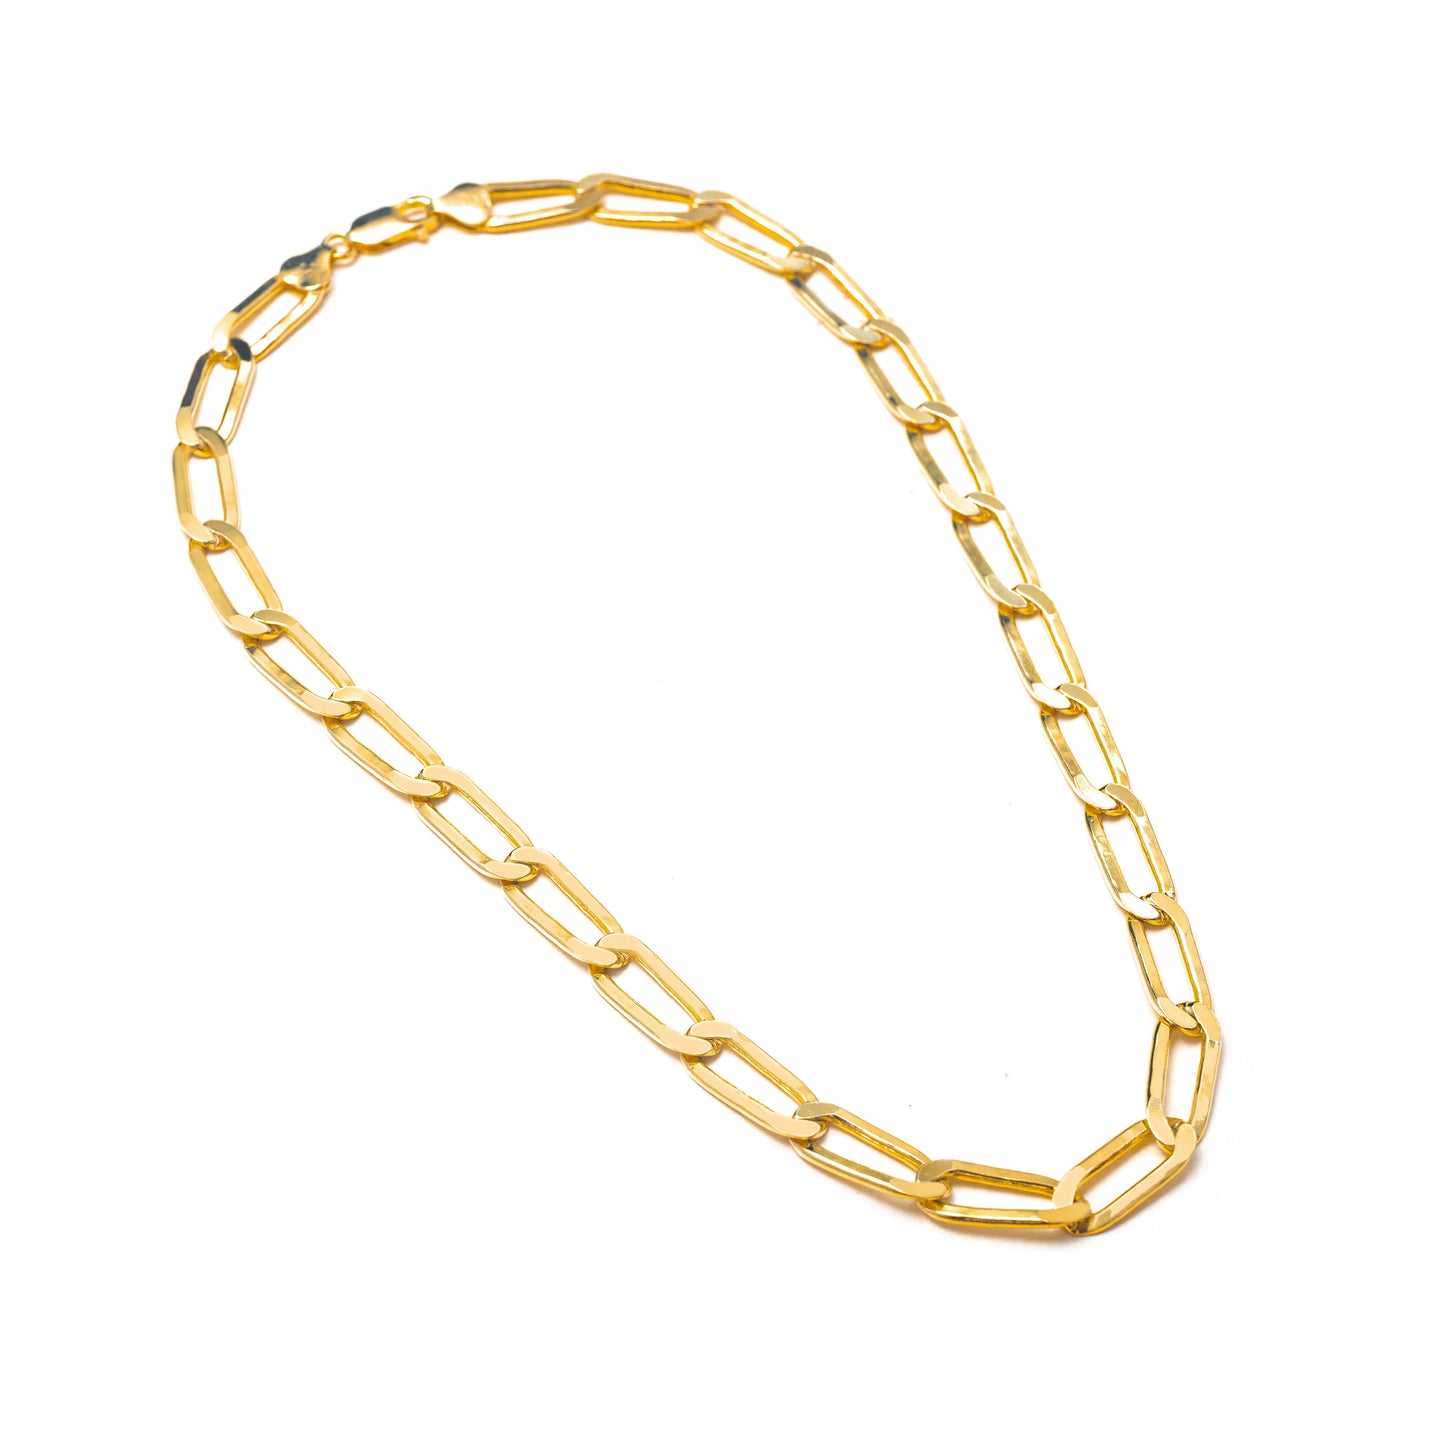 CLASSIC CHAIN LINK NECKLACES